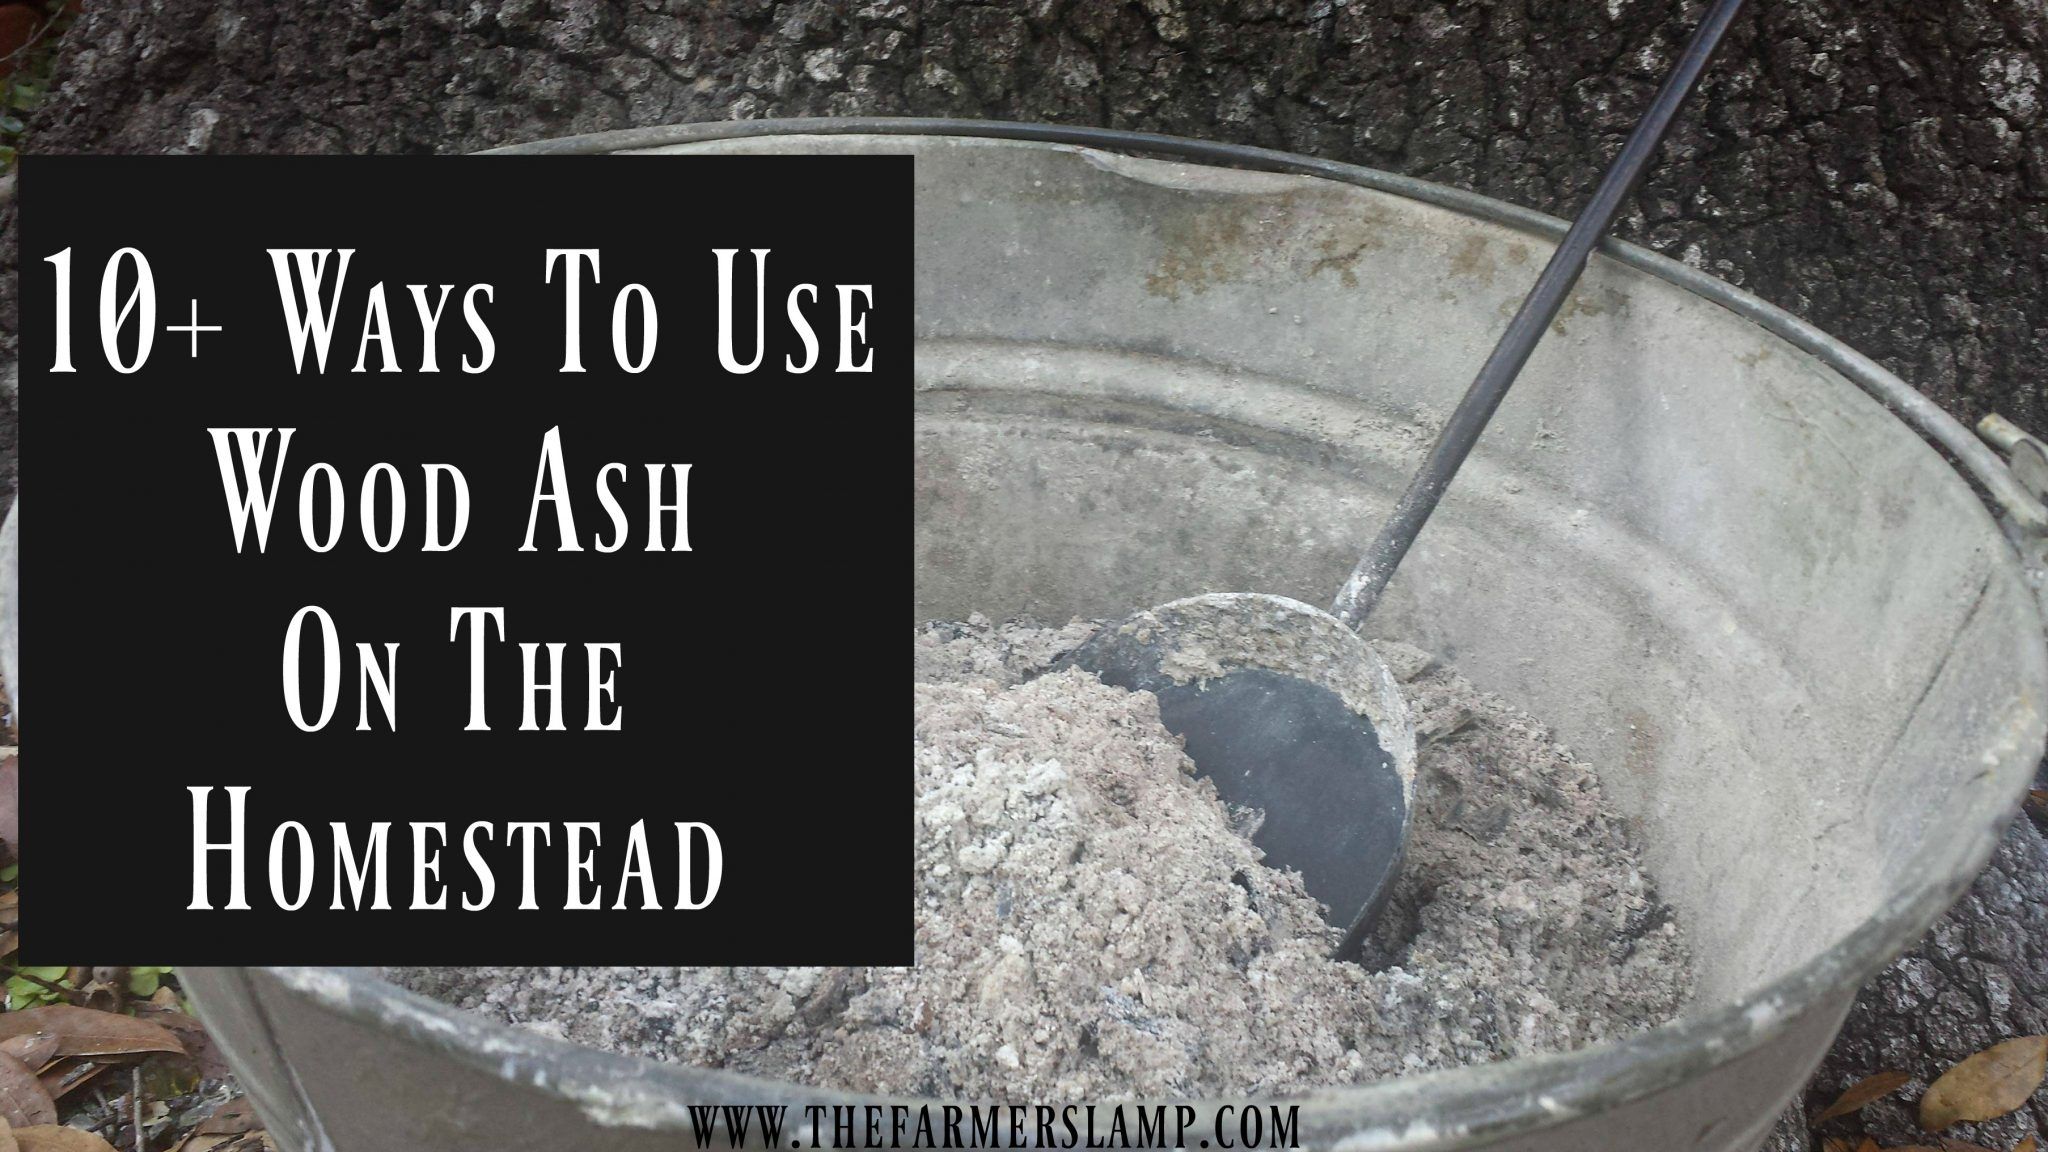 Fireplace ashes In Garden Lovely 10 Ways to Use Wood ash the Homestead